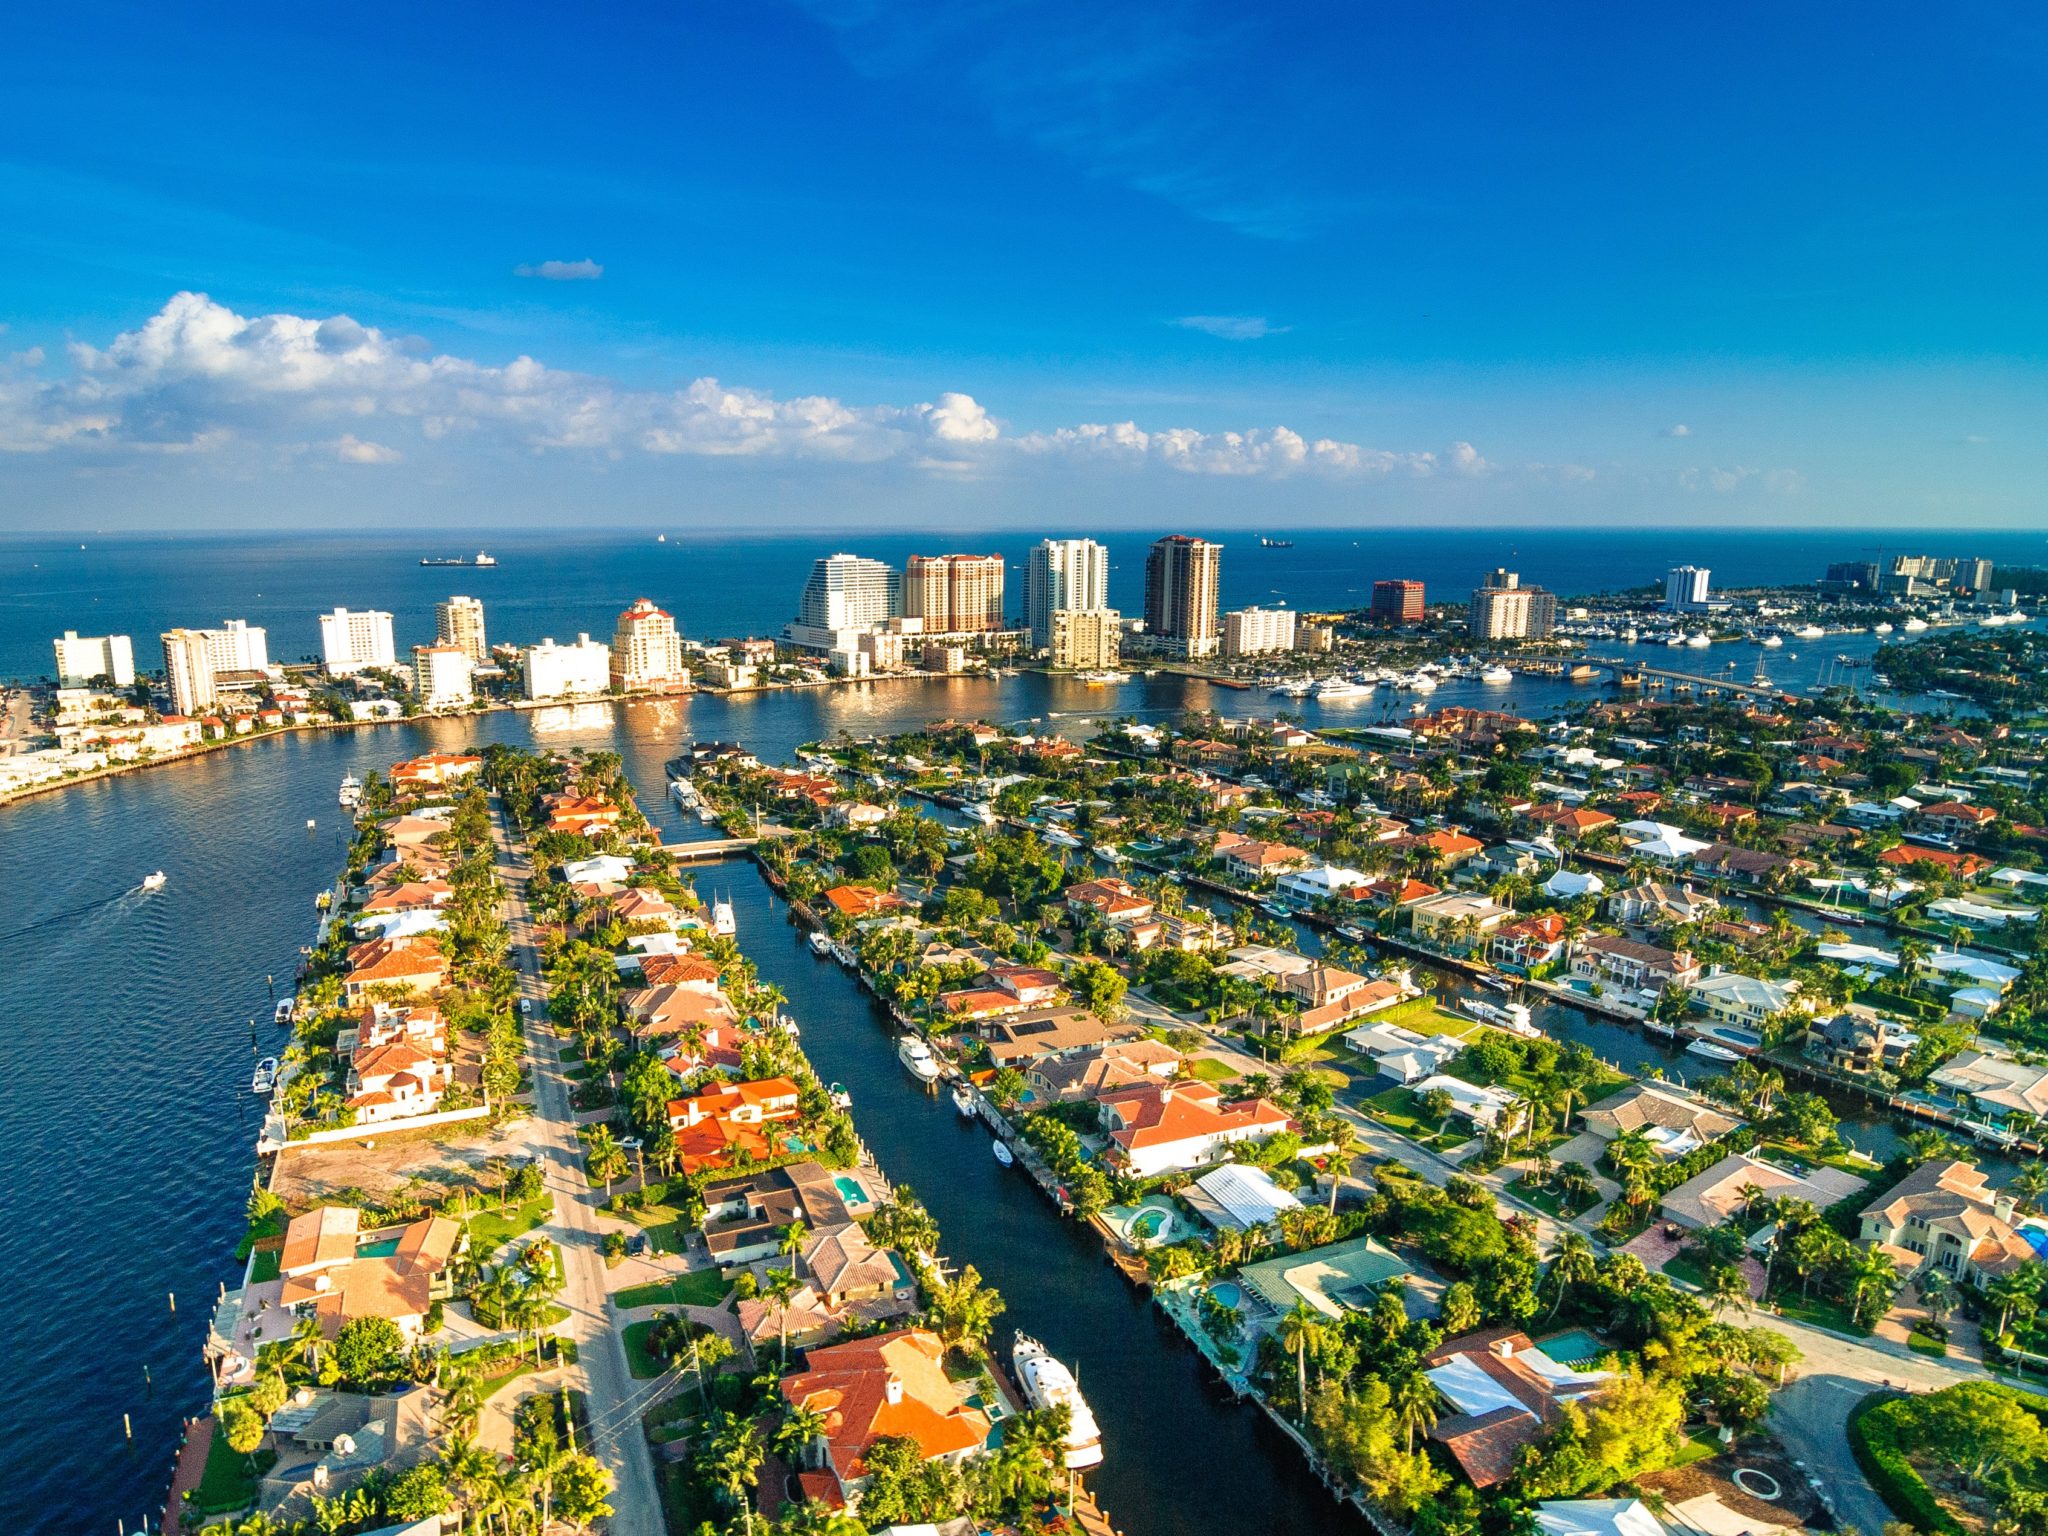 Fort Lauderdale/Broward County Leads the Nation in Home Value Growth Over the Past Decade